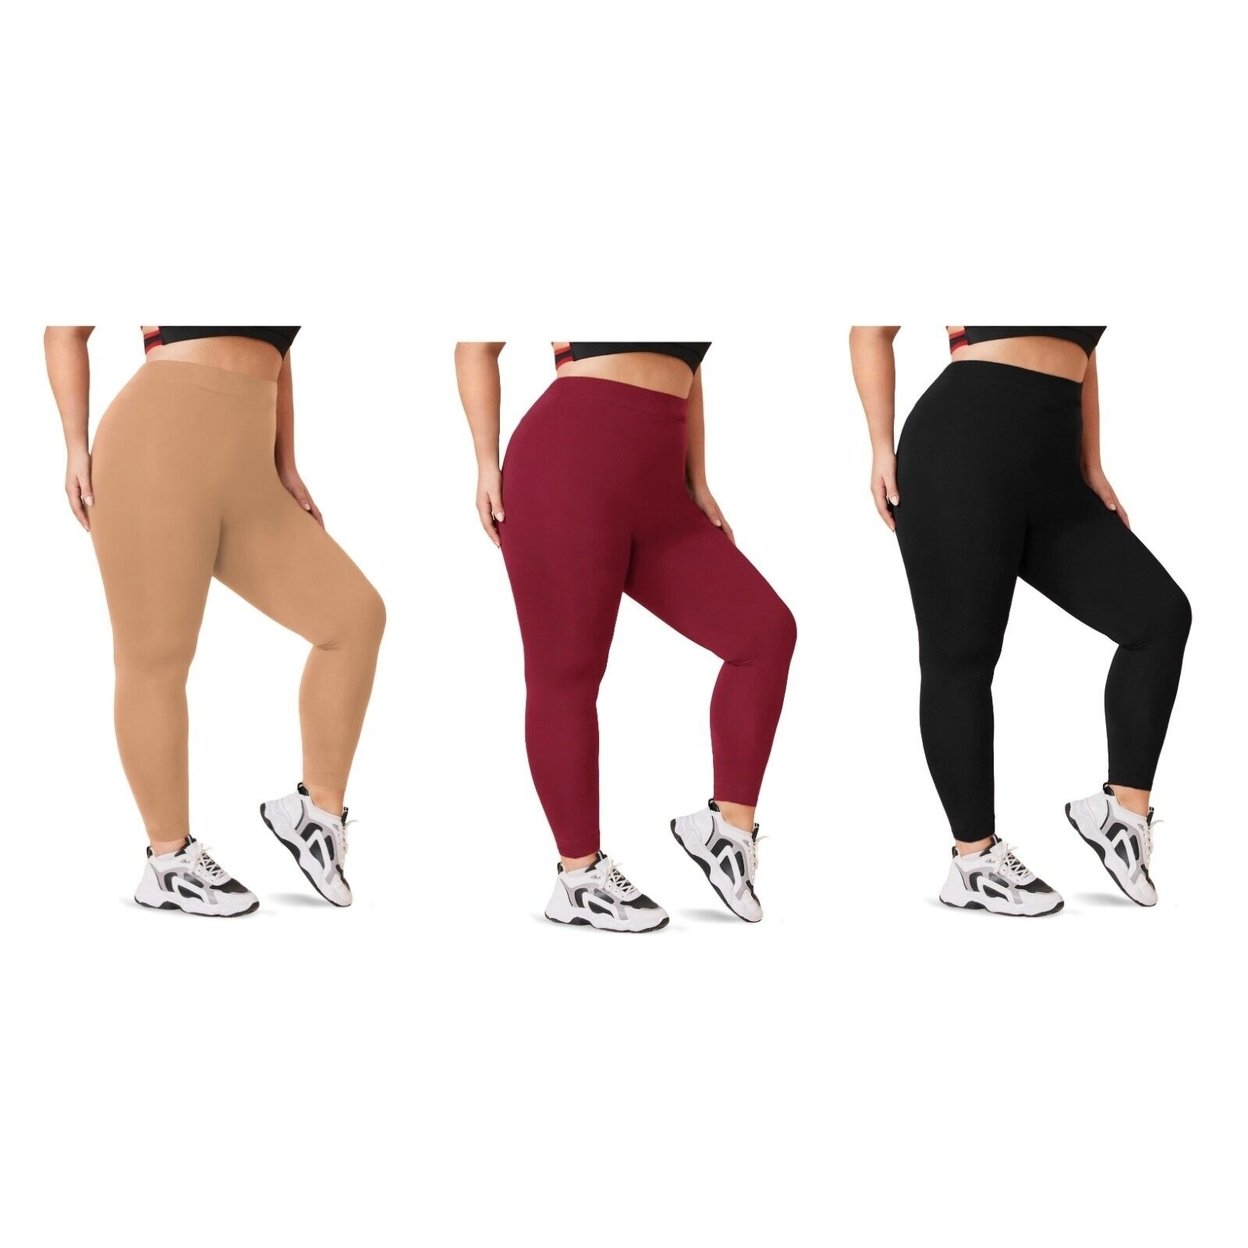 Multi-Pack: Women's Casual Ultra-Soft Smooth High Waisted Athletic Active Yoga Leggings Plus Size Available - 3-pack, 4x